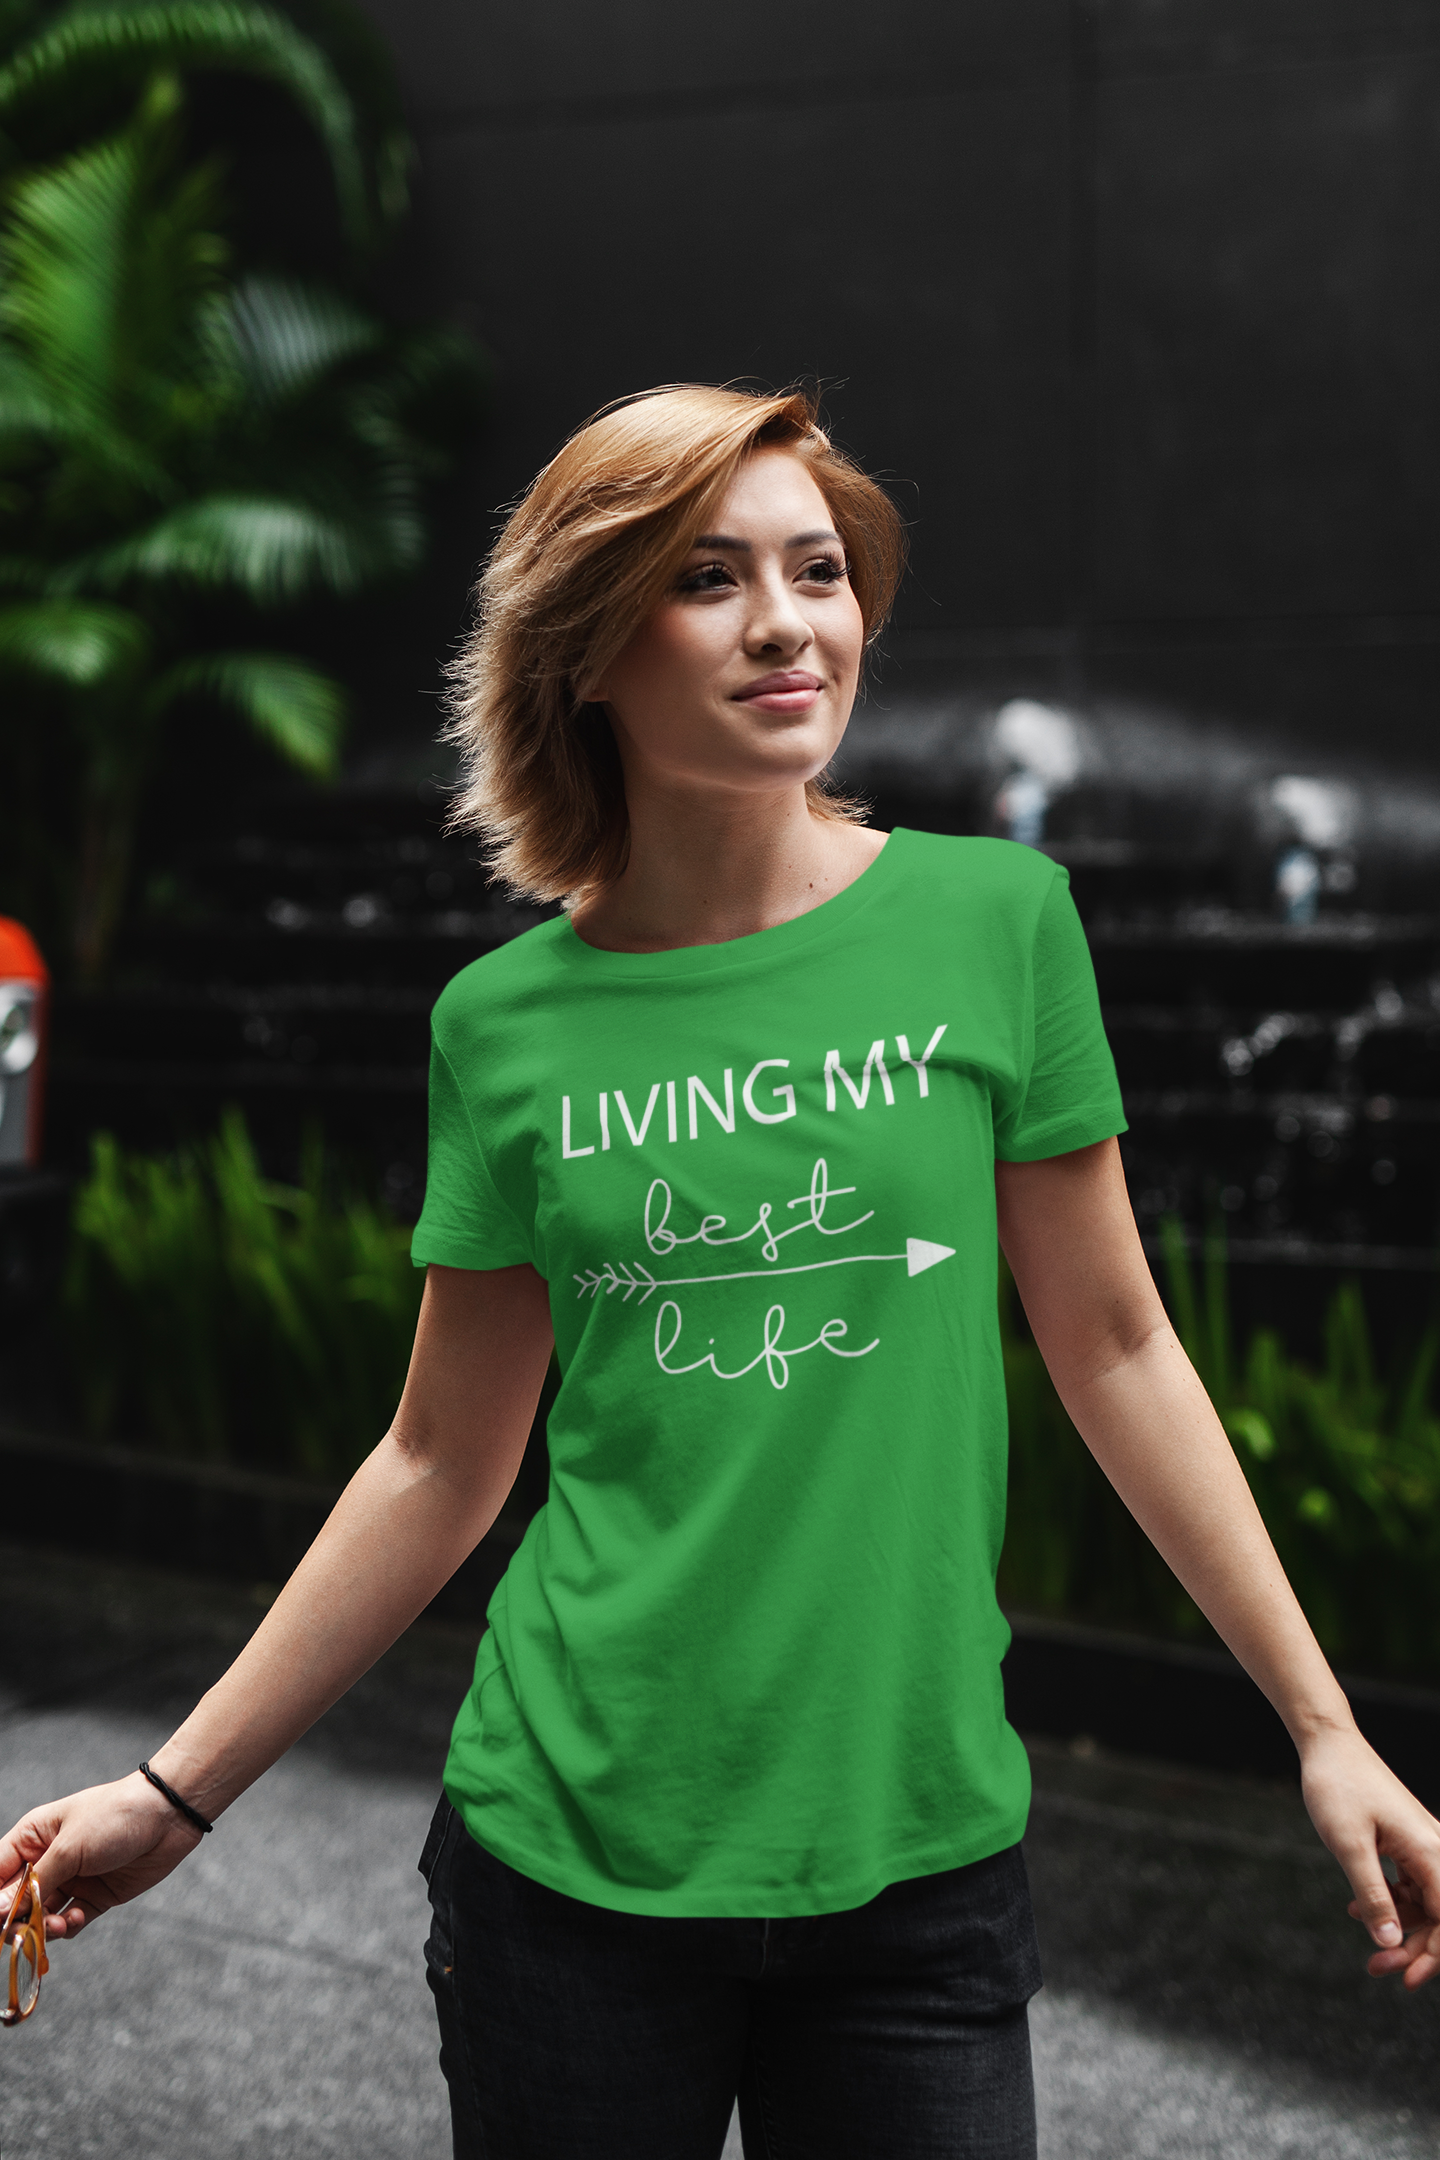 t-shirt-mockup-of-a-young-woman-standing-against-a-dark-background-with-some-plants-411-el